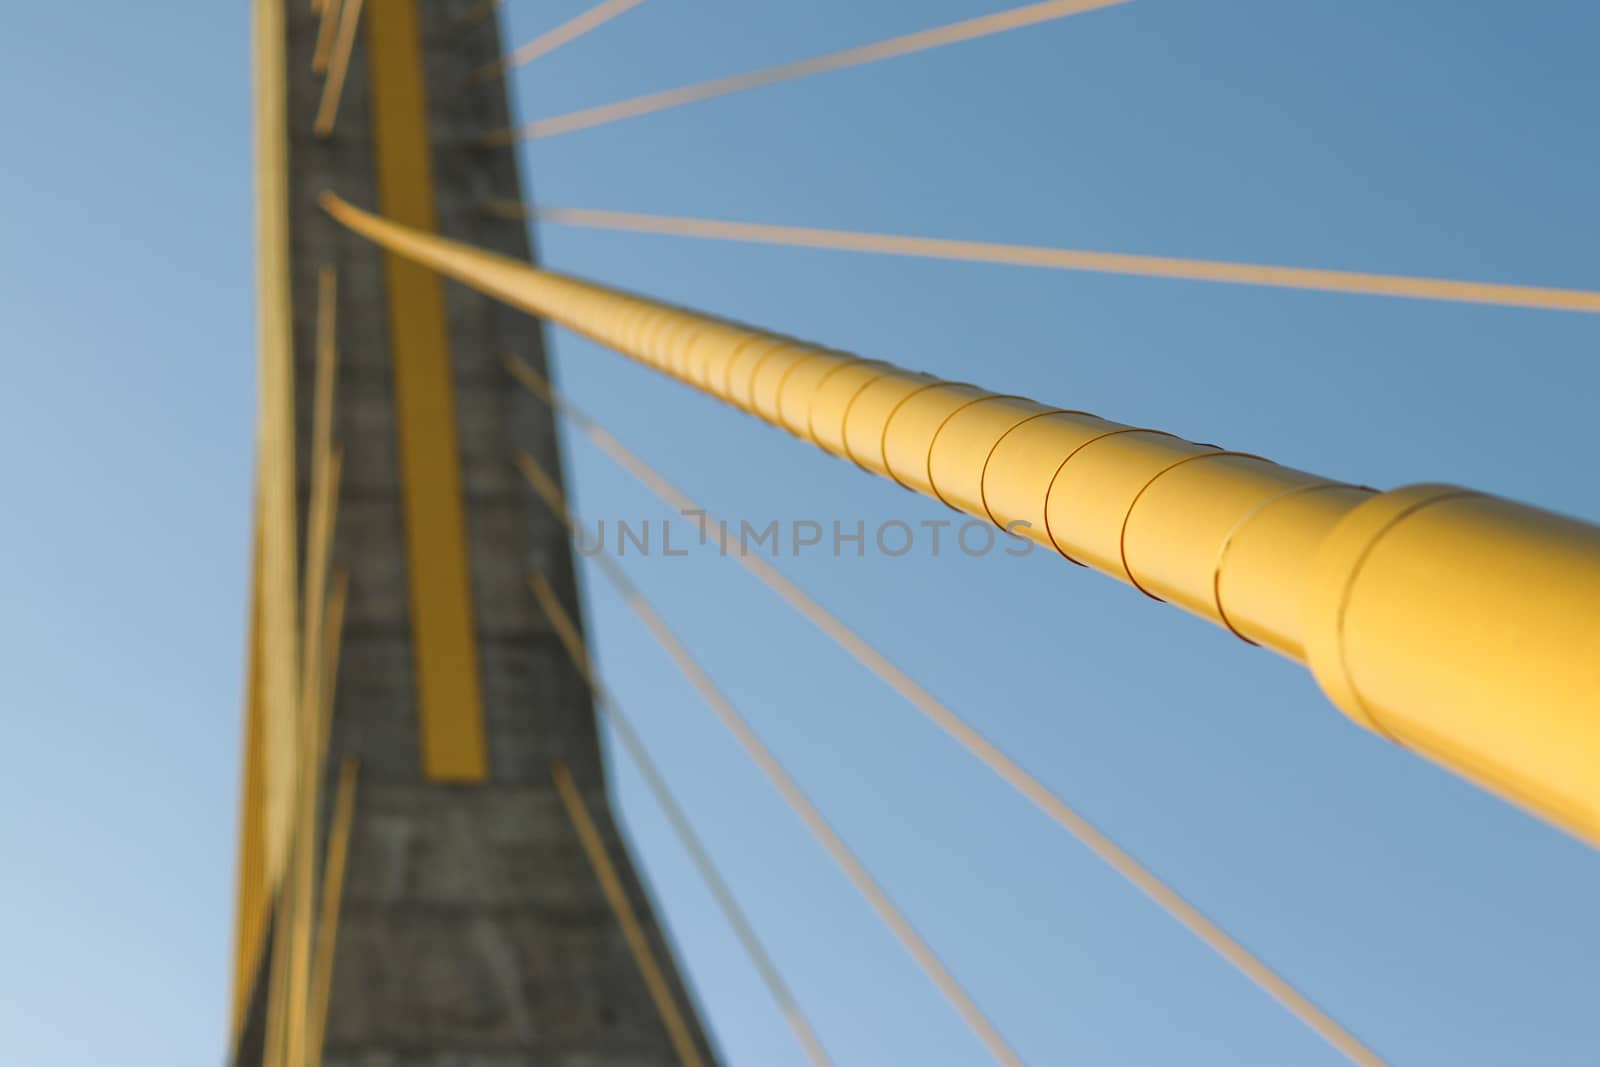 The yellow cable of the suspension bridge. The cable of the suspension bridge will have tension to support the weight of the bridge. by Eungsuwat